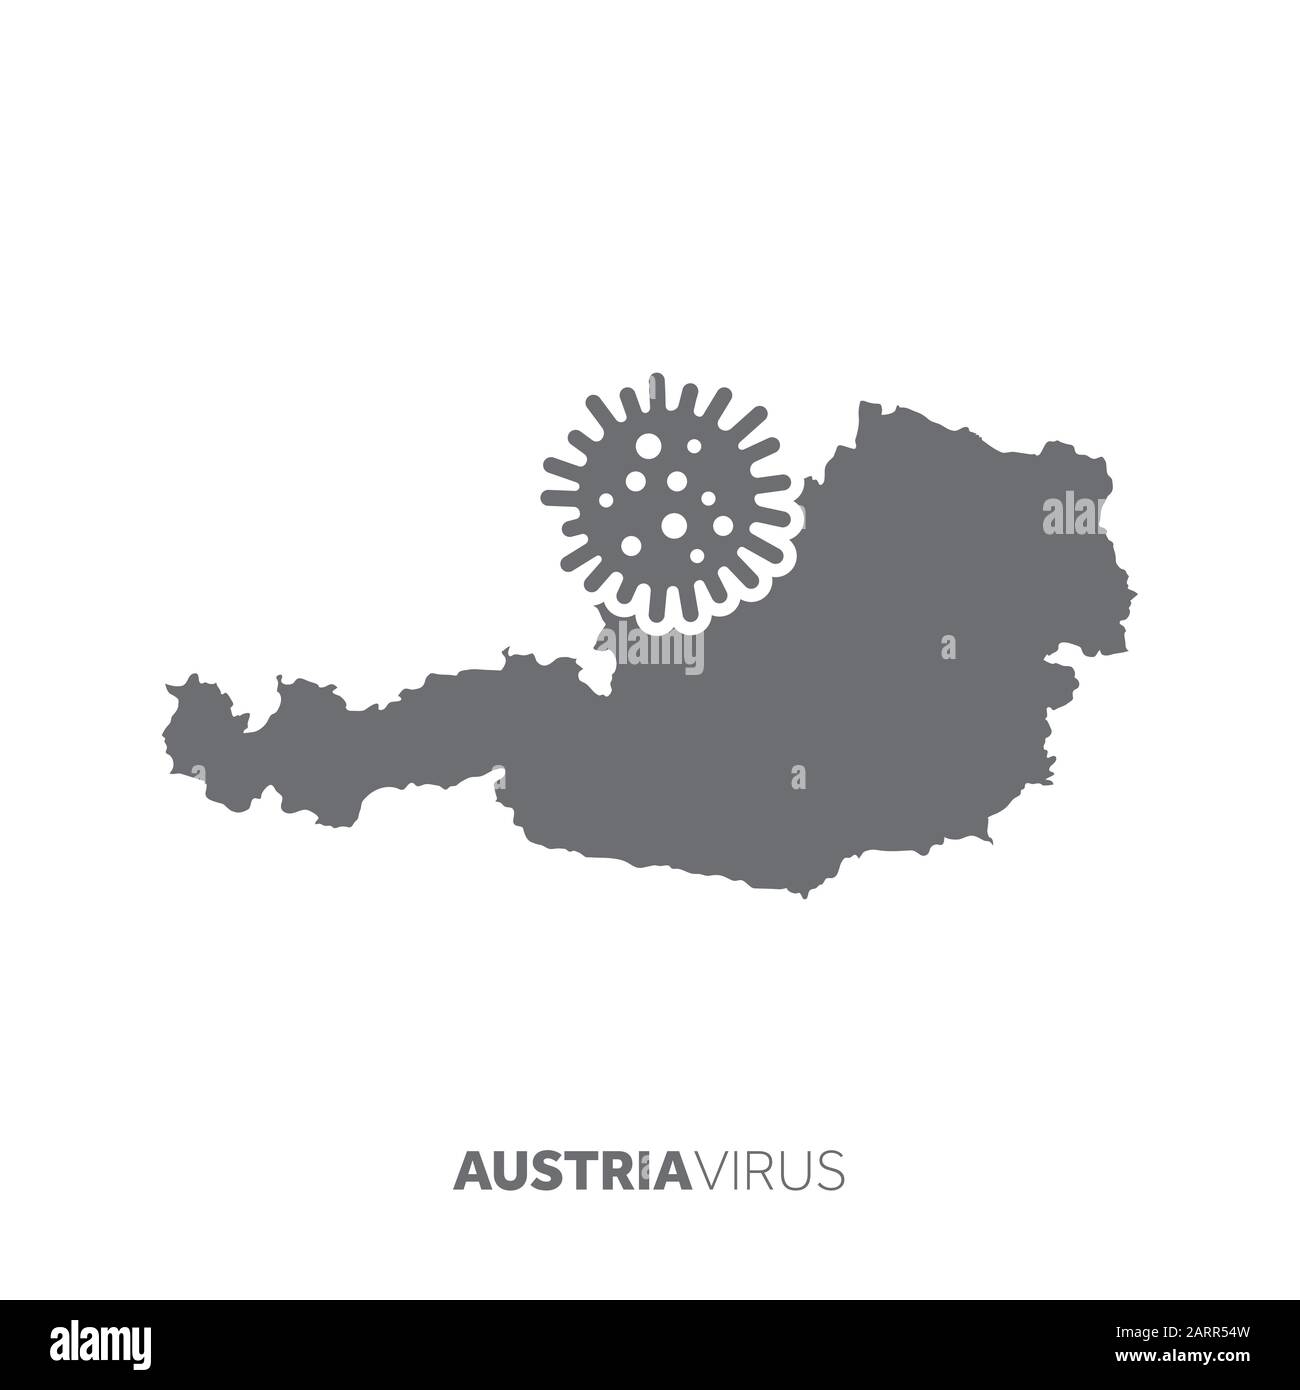 Austria map with a virus microbe. Illness and disease outbreak Stock Vector